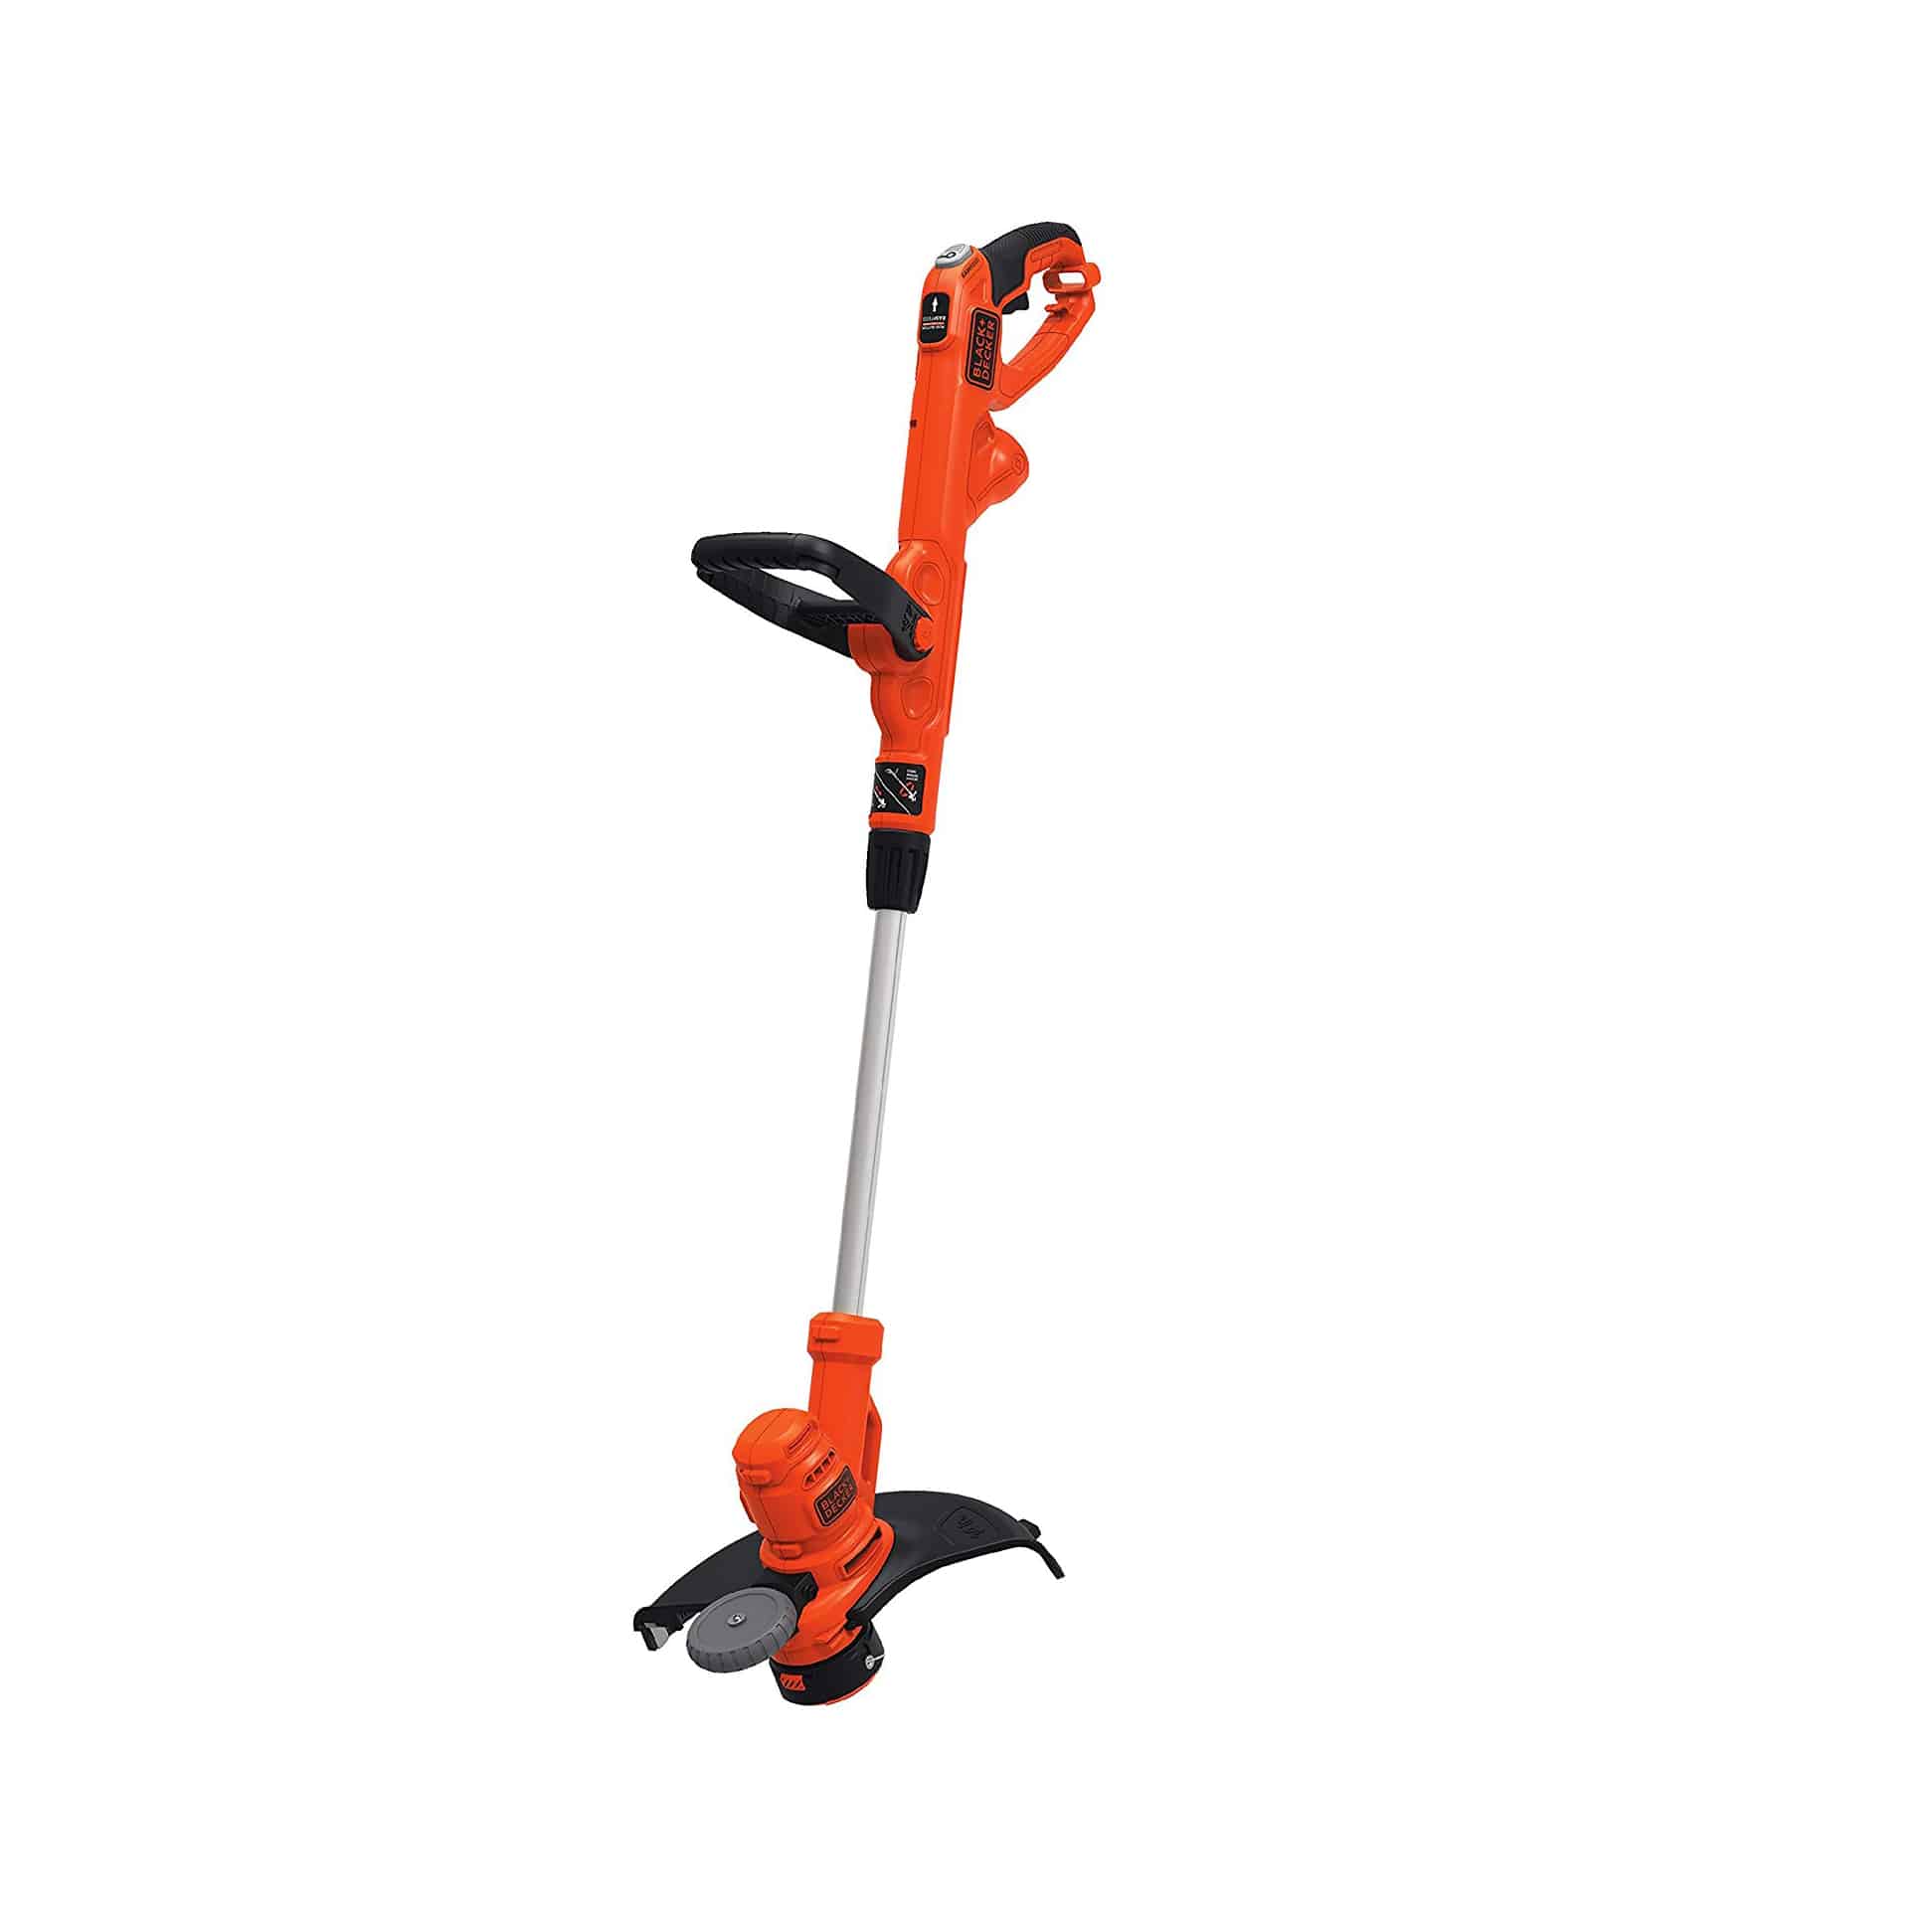 Top 10 Best Electric String Trimmers in 2021 Reviews Guide